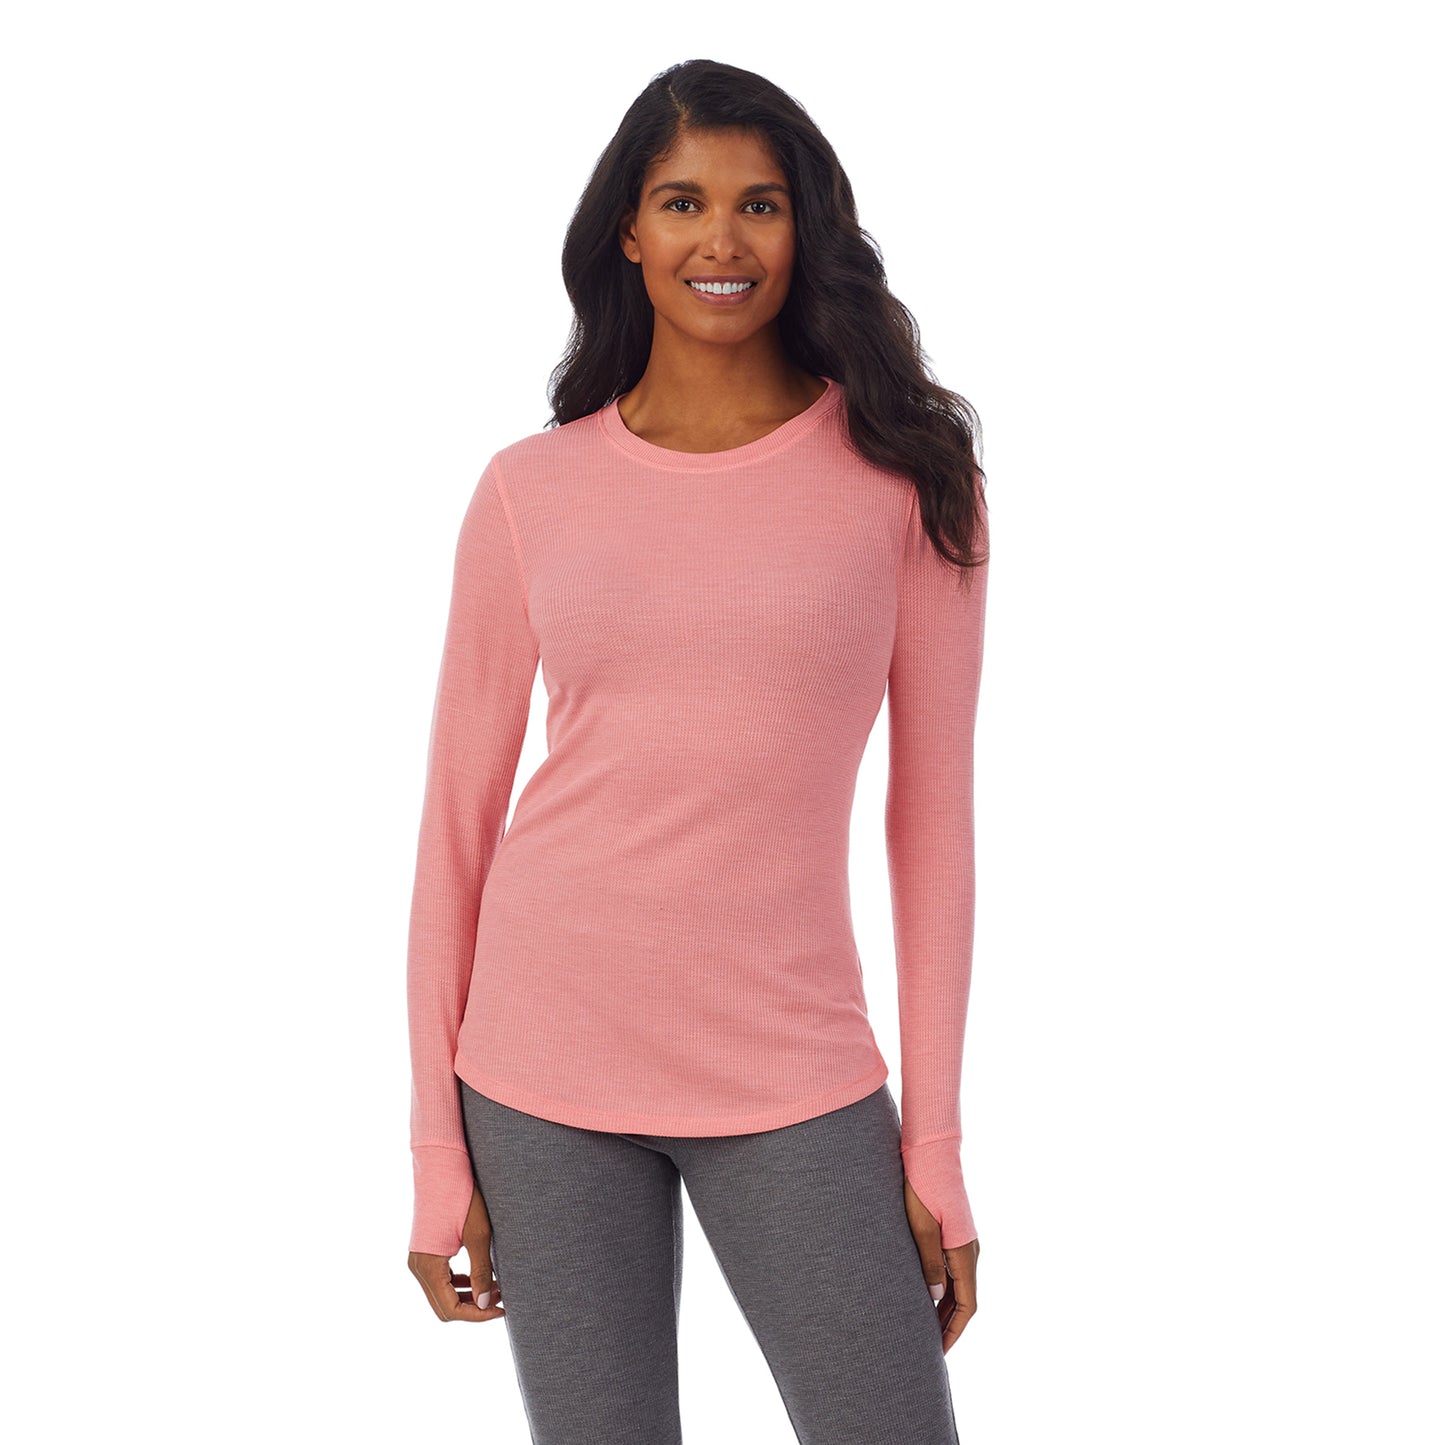 Bright Coral Heather; Model is wearing size S. She is 5’10”, Bust 34”, Waist 24”, Hips 34”. @A lady wearing a Bright Coral Heather long sleeve crew.